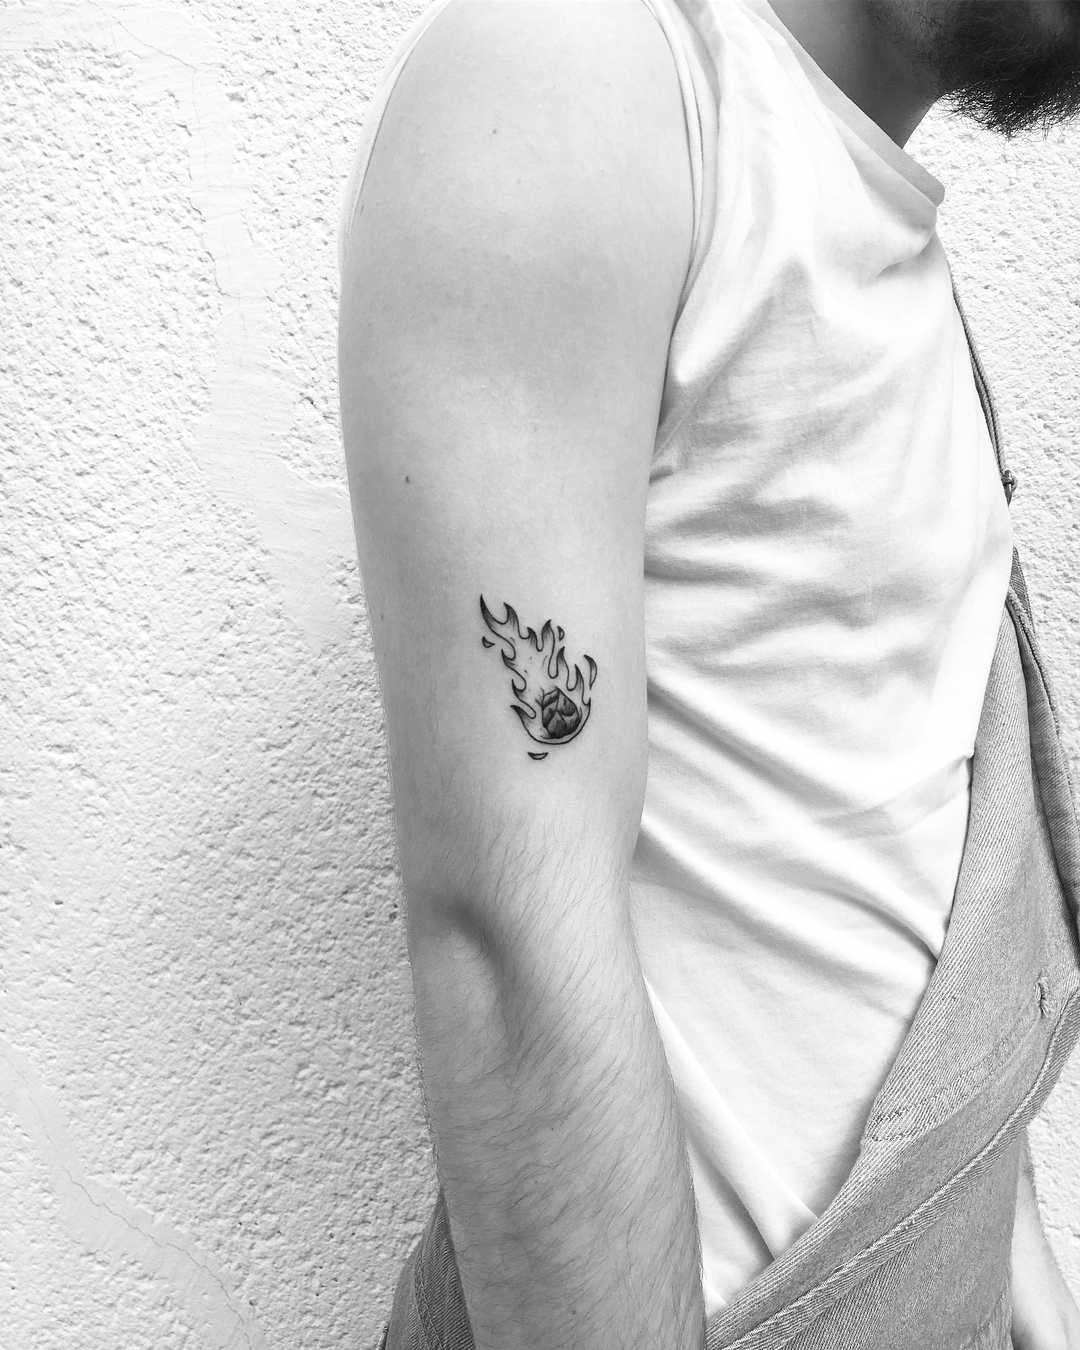 Burning comet tattoo on the arm